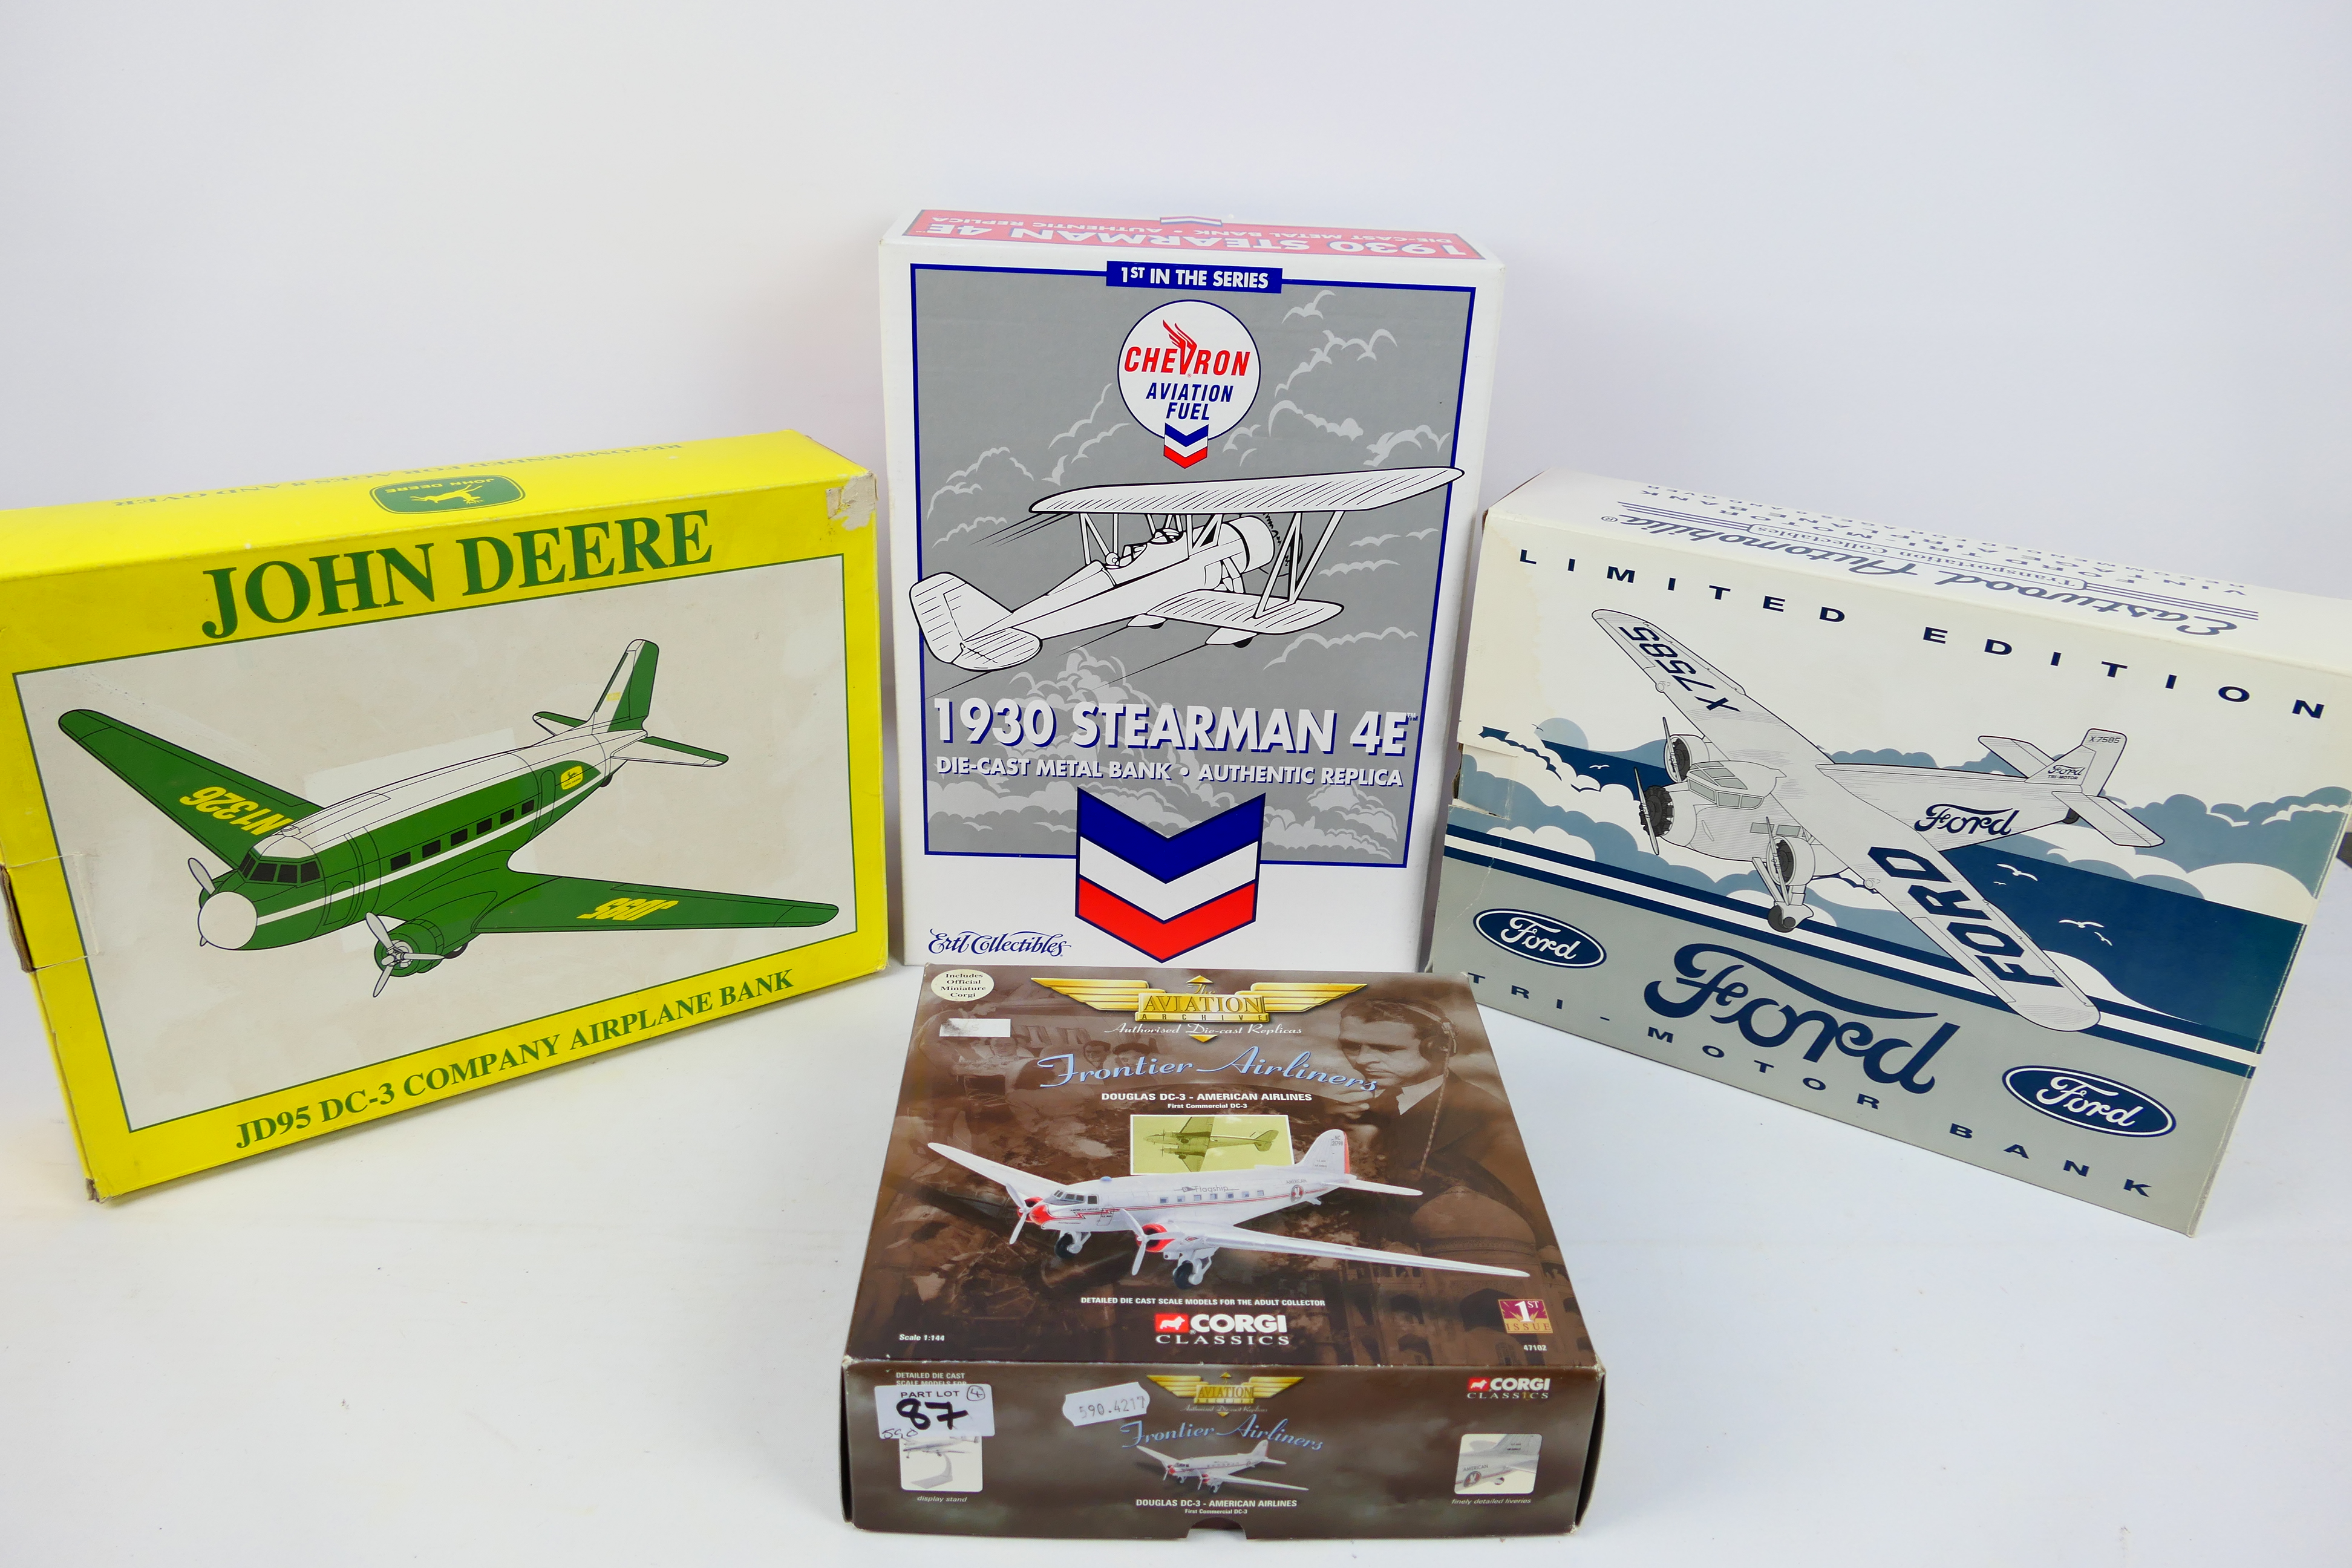 Corgi Aviation Archive - Ertl Collectibles - A boxed diecast model aircraft and three diecast model